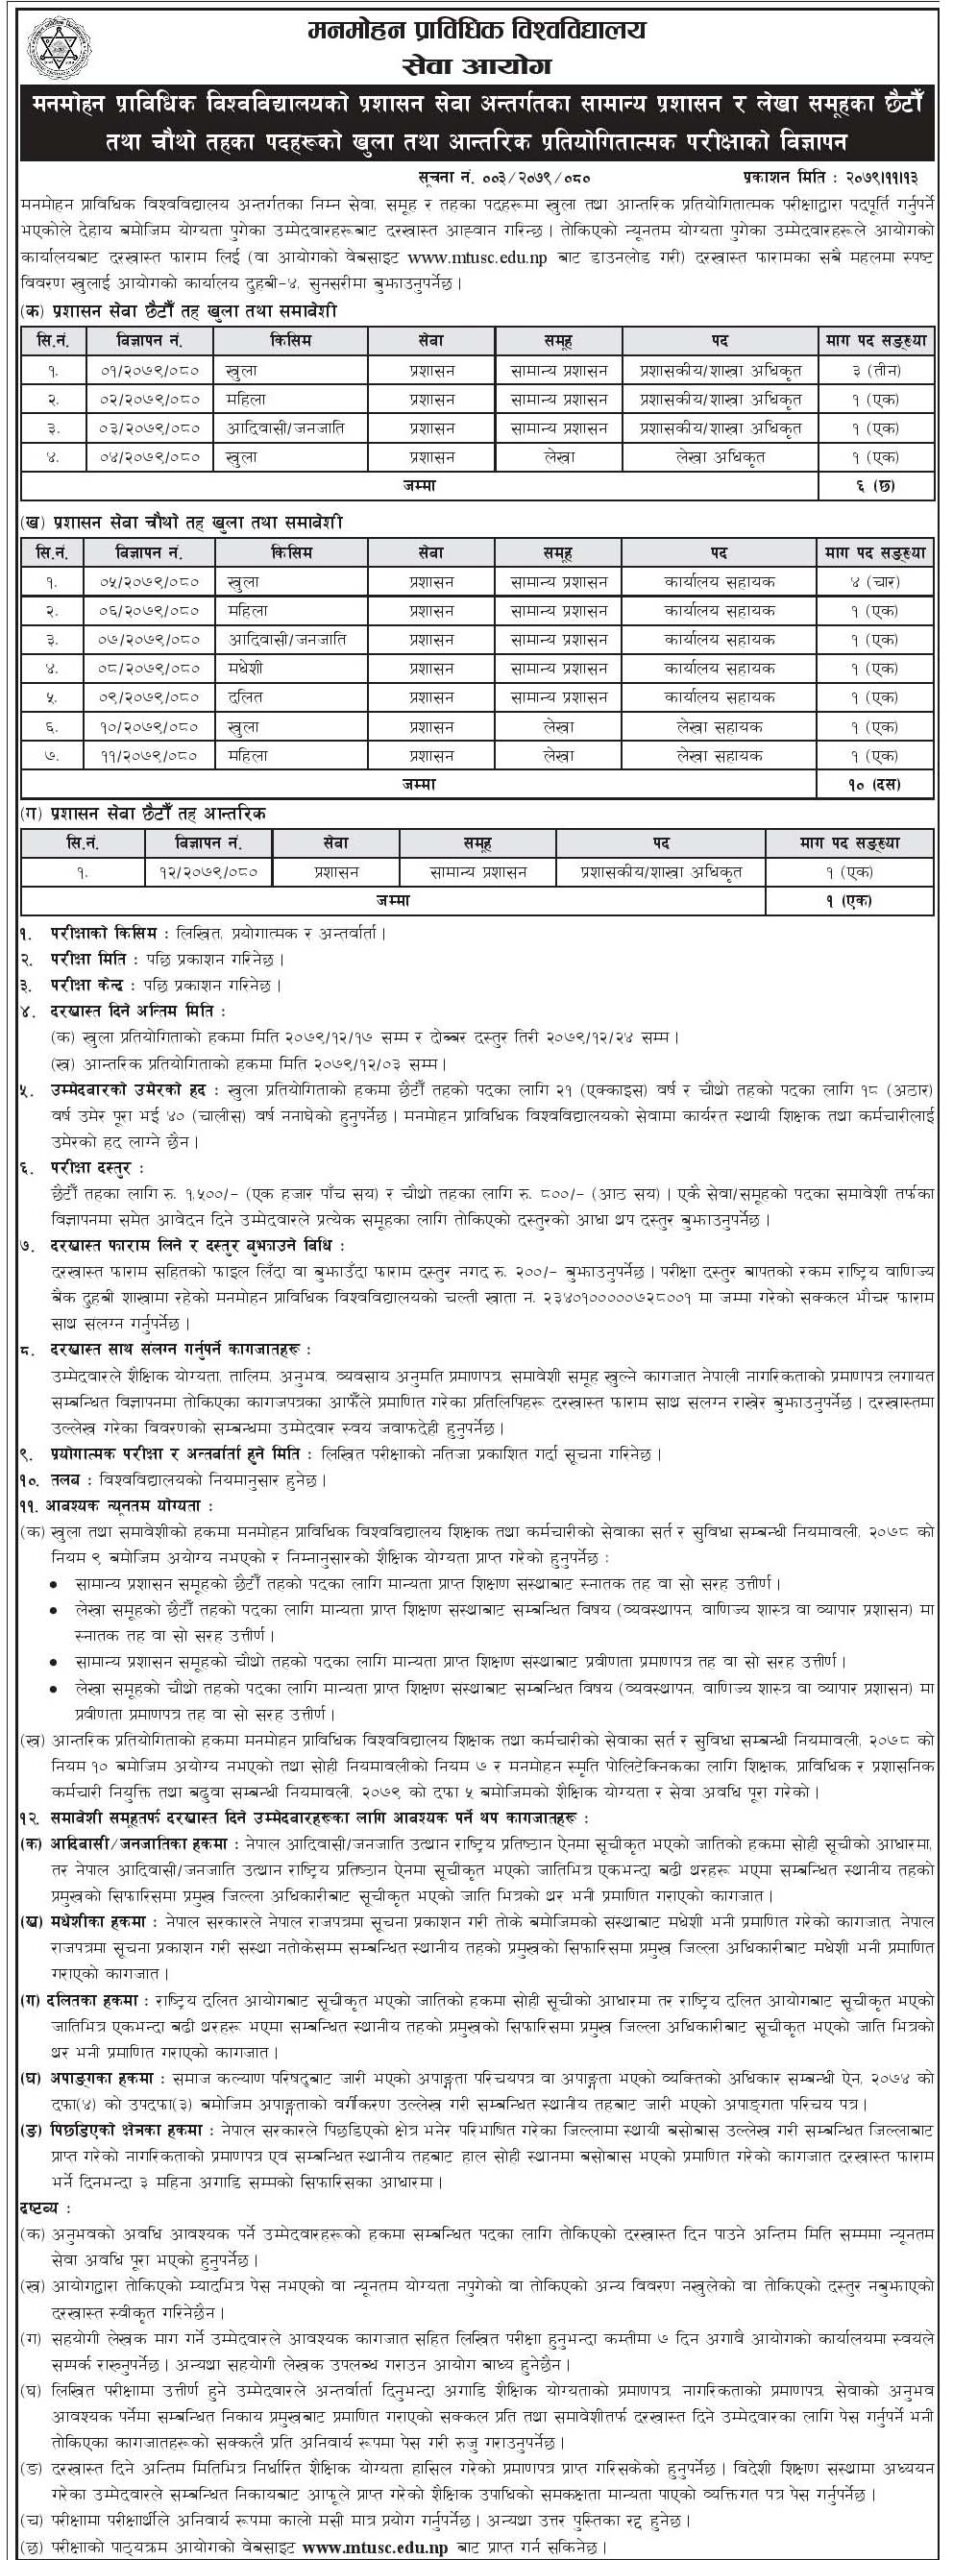 Manmohan Technical University Service Commission has advertised for open and internal promotions.

An open and internal competitive examination has been announced for the sixth and fourth level posts of the general administration and accounting group under the administration service.